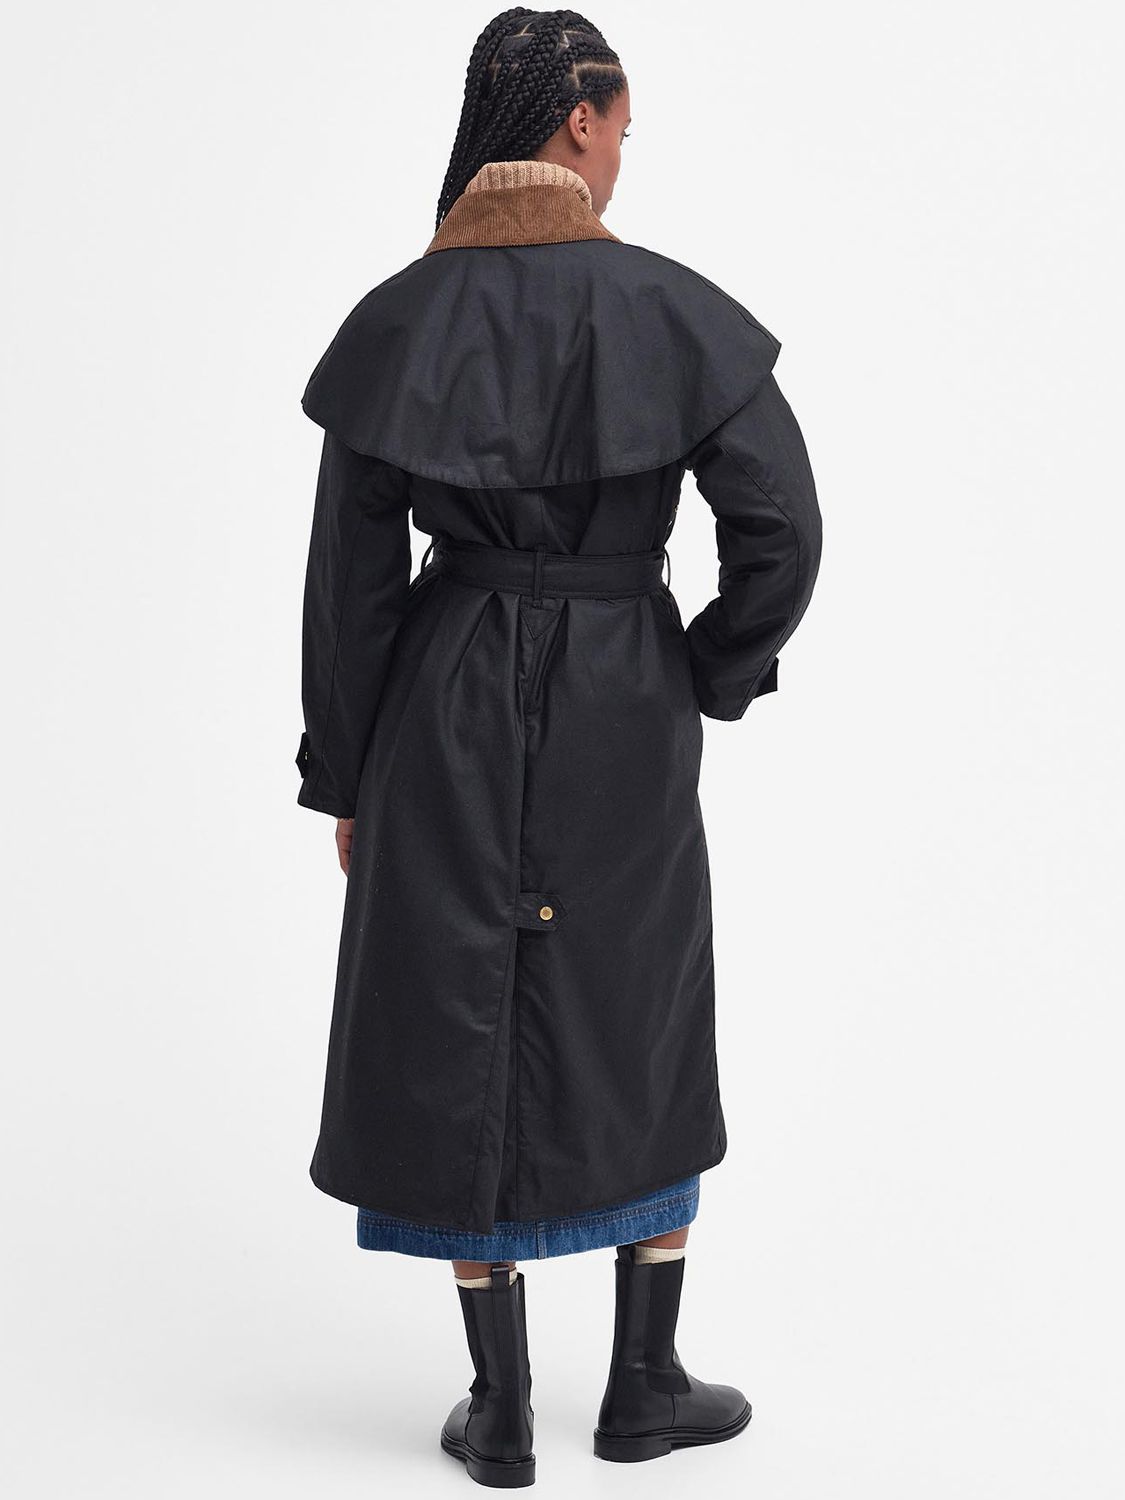 Barbour Tomorrow's Archive Manderston Wax Trench Coat, Black at John ...